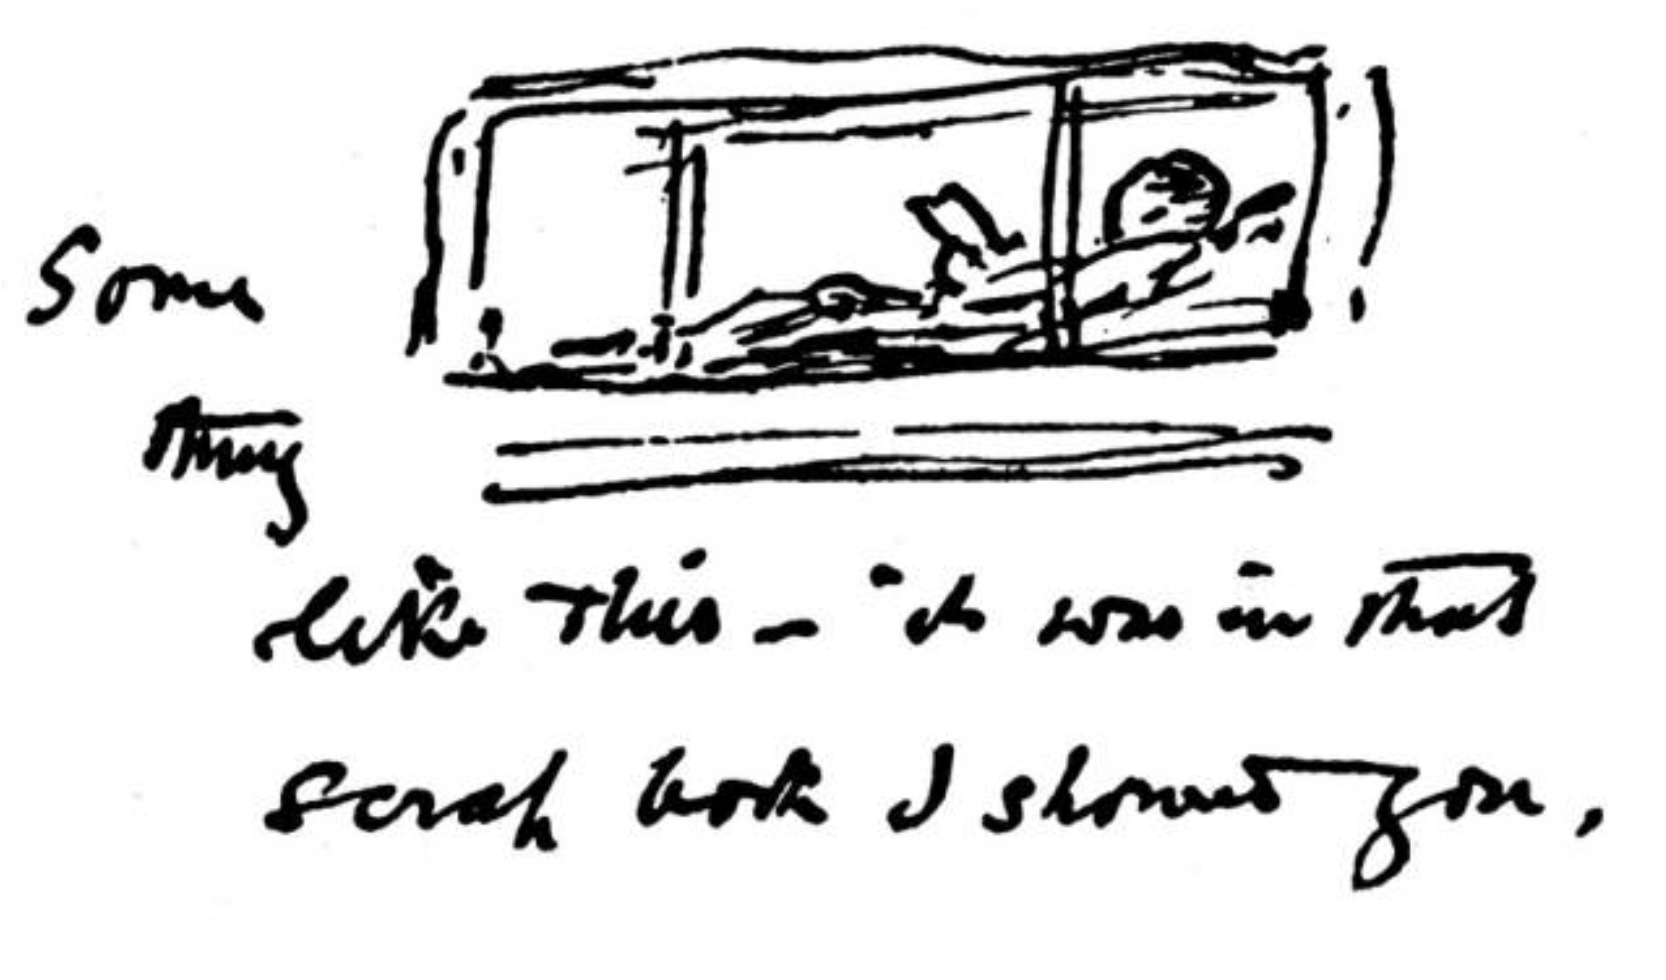 Keats, reading on board the Maria Crowther, by Arthur Severn, based on Joseph
        Severn’s lost drawing, reproduced from Caroline Spurgeon’s Keats’s Shakespeare,
        p.viii.